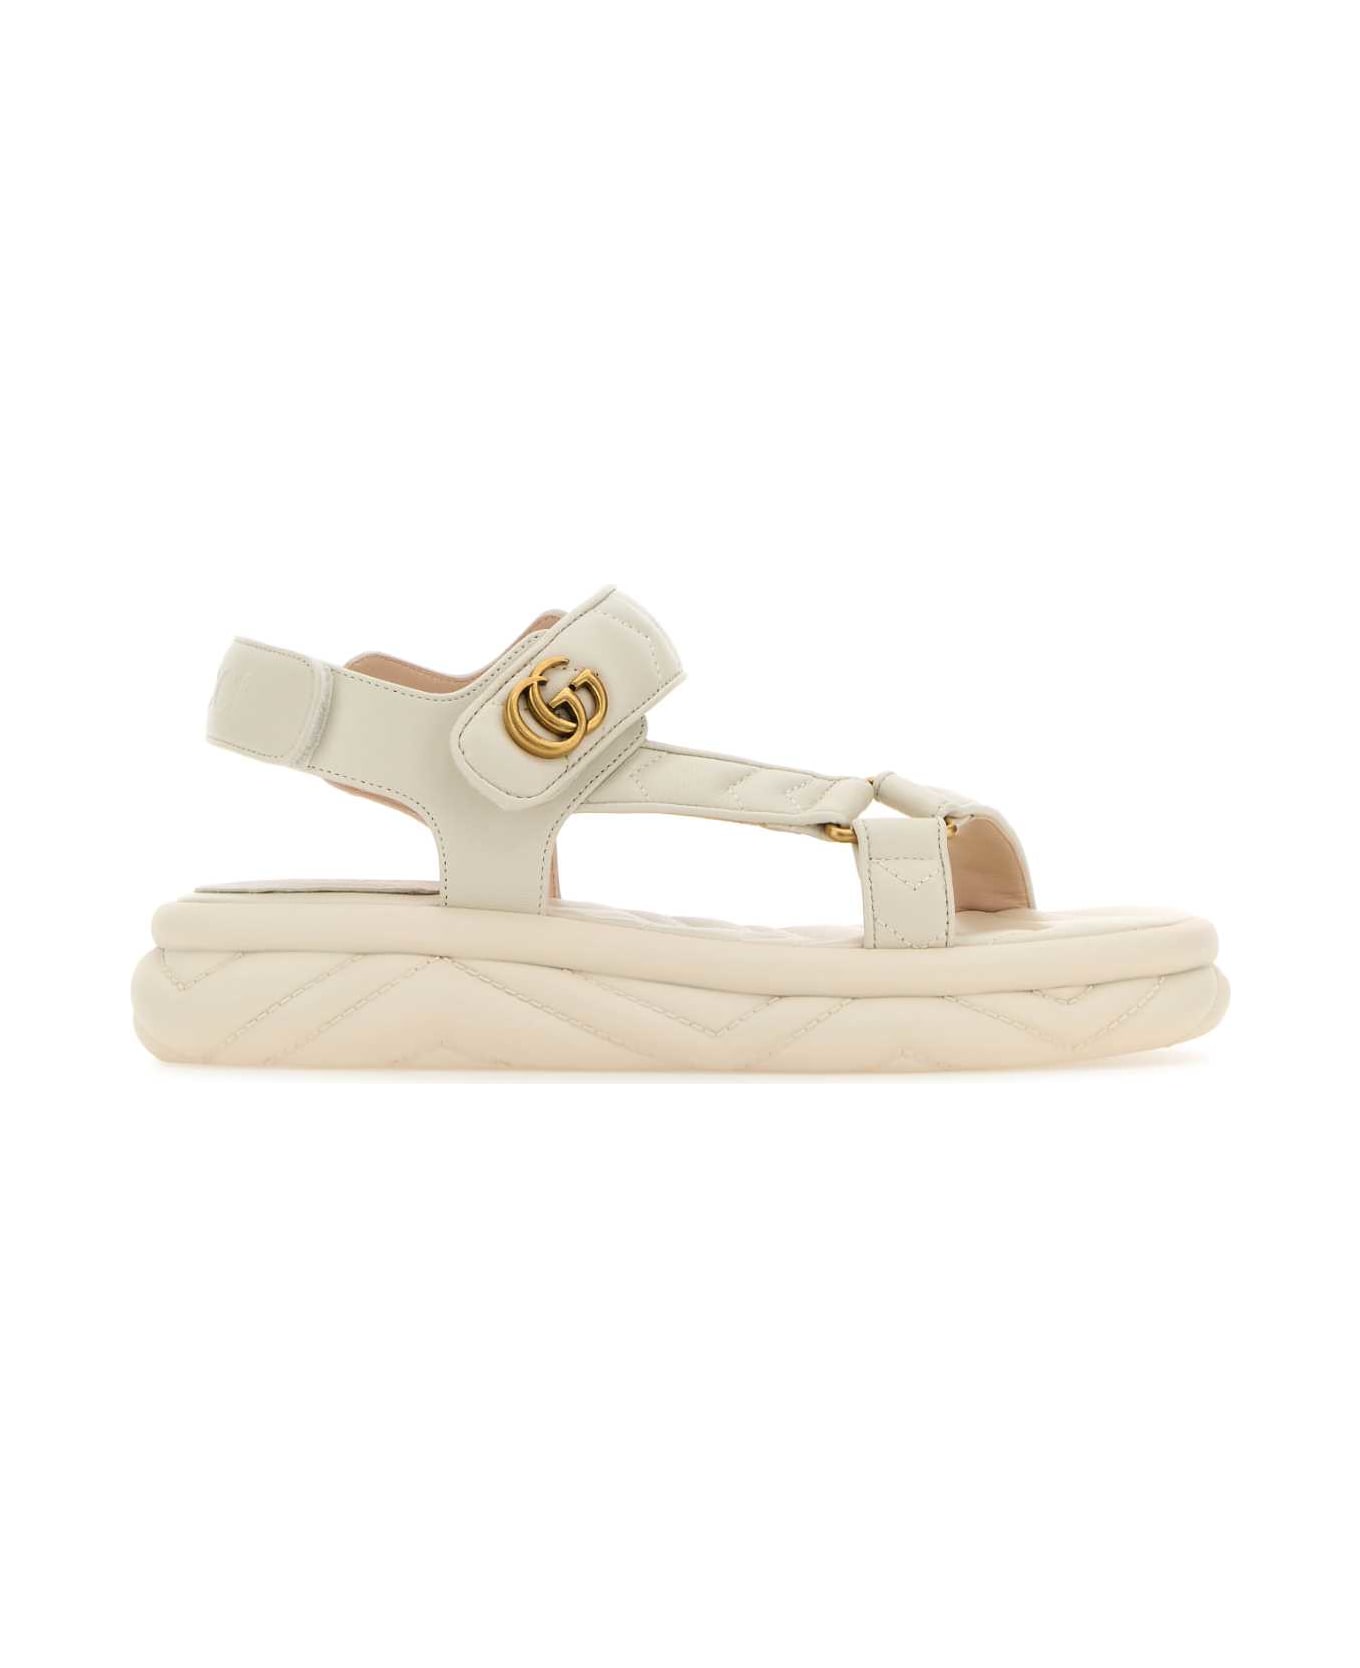 Gucci Ivory Leather Sandals - NMYWHINMYWHNM